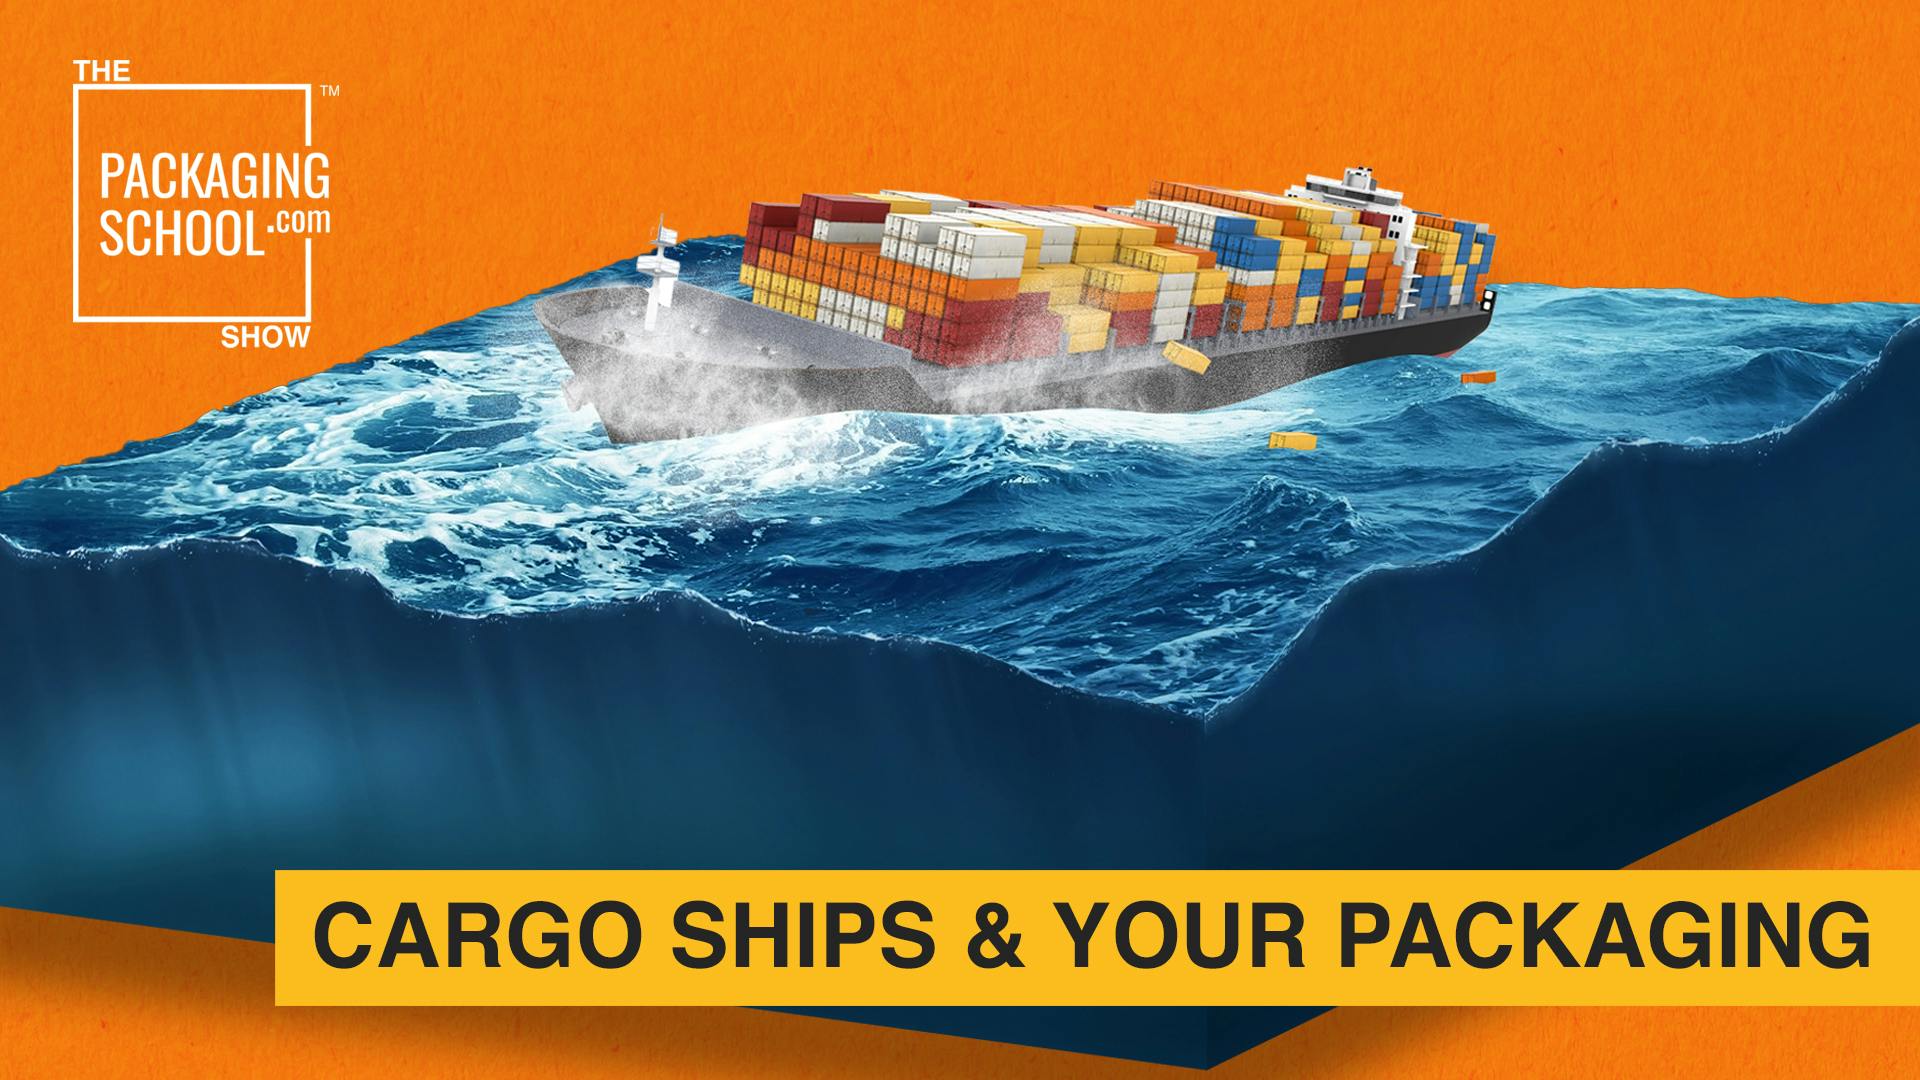 Waves Can Terrorize Cargo Ships and Your Packaging